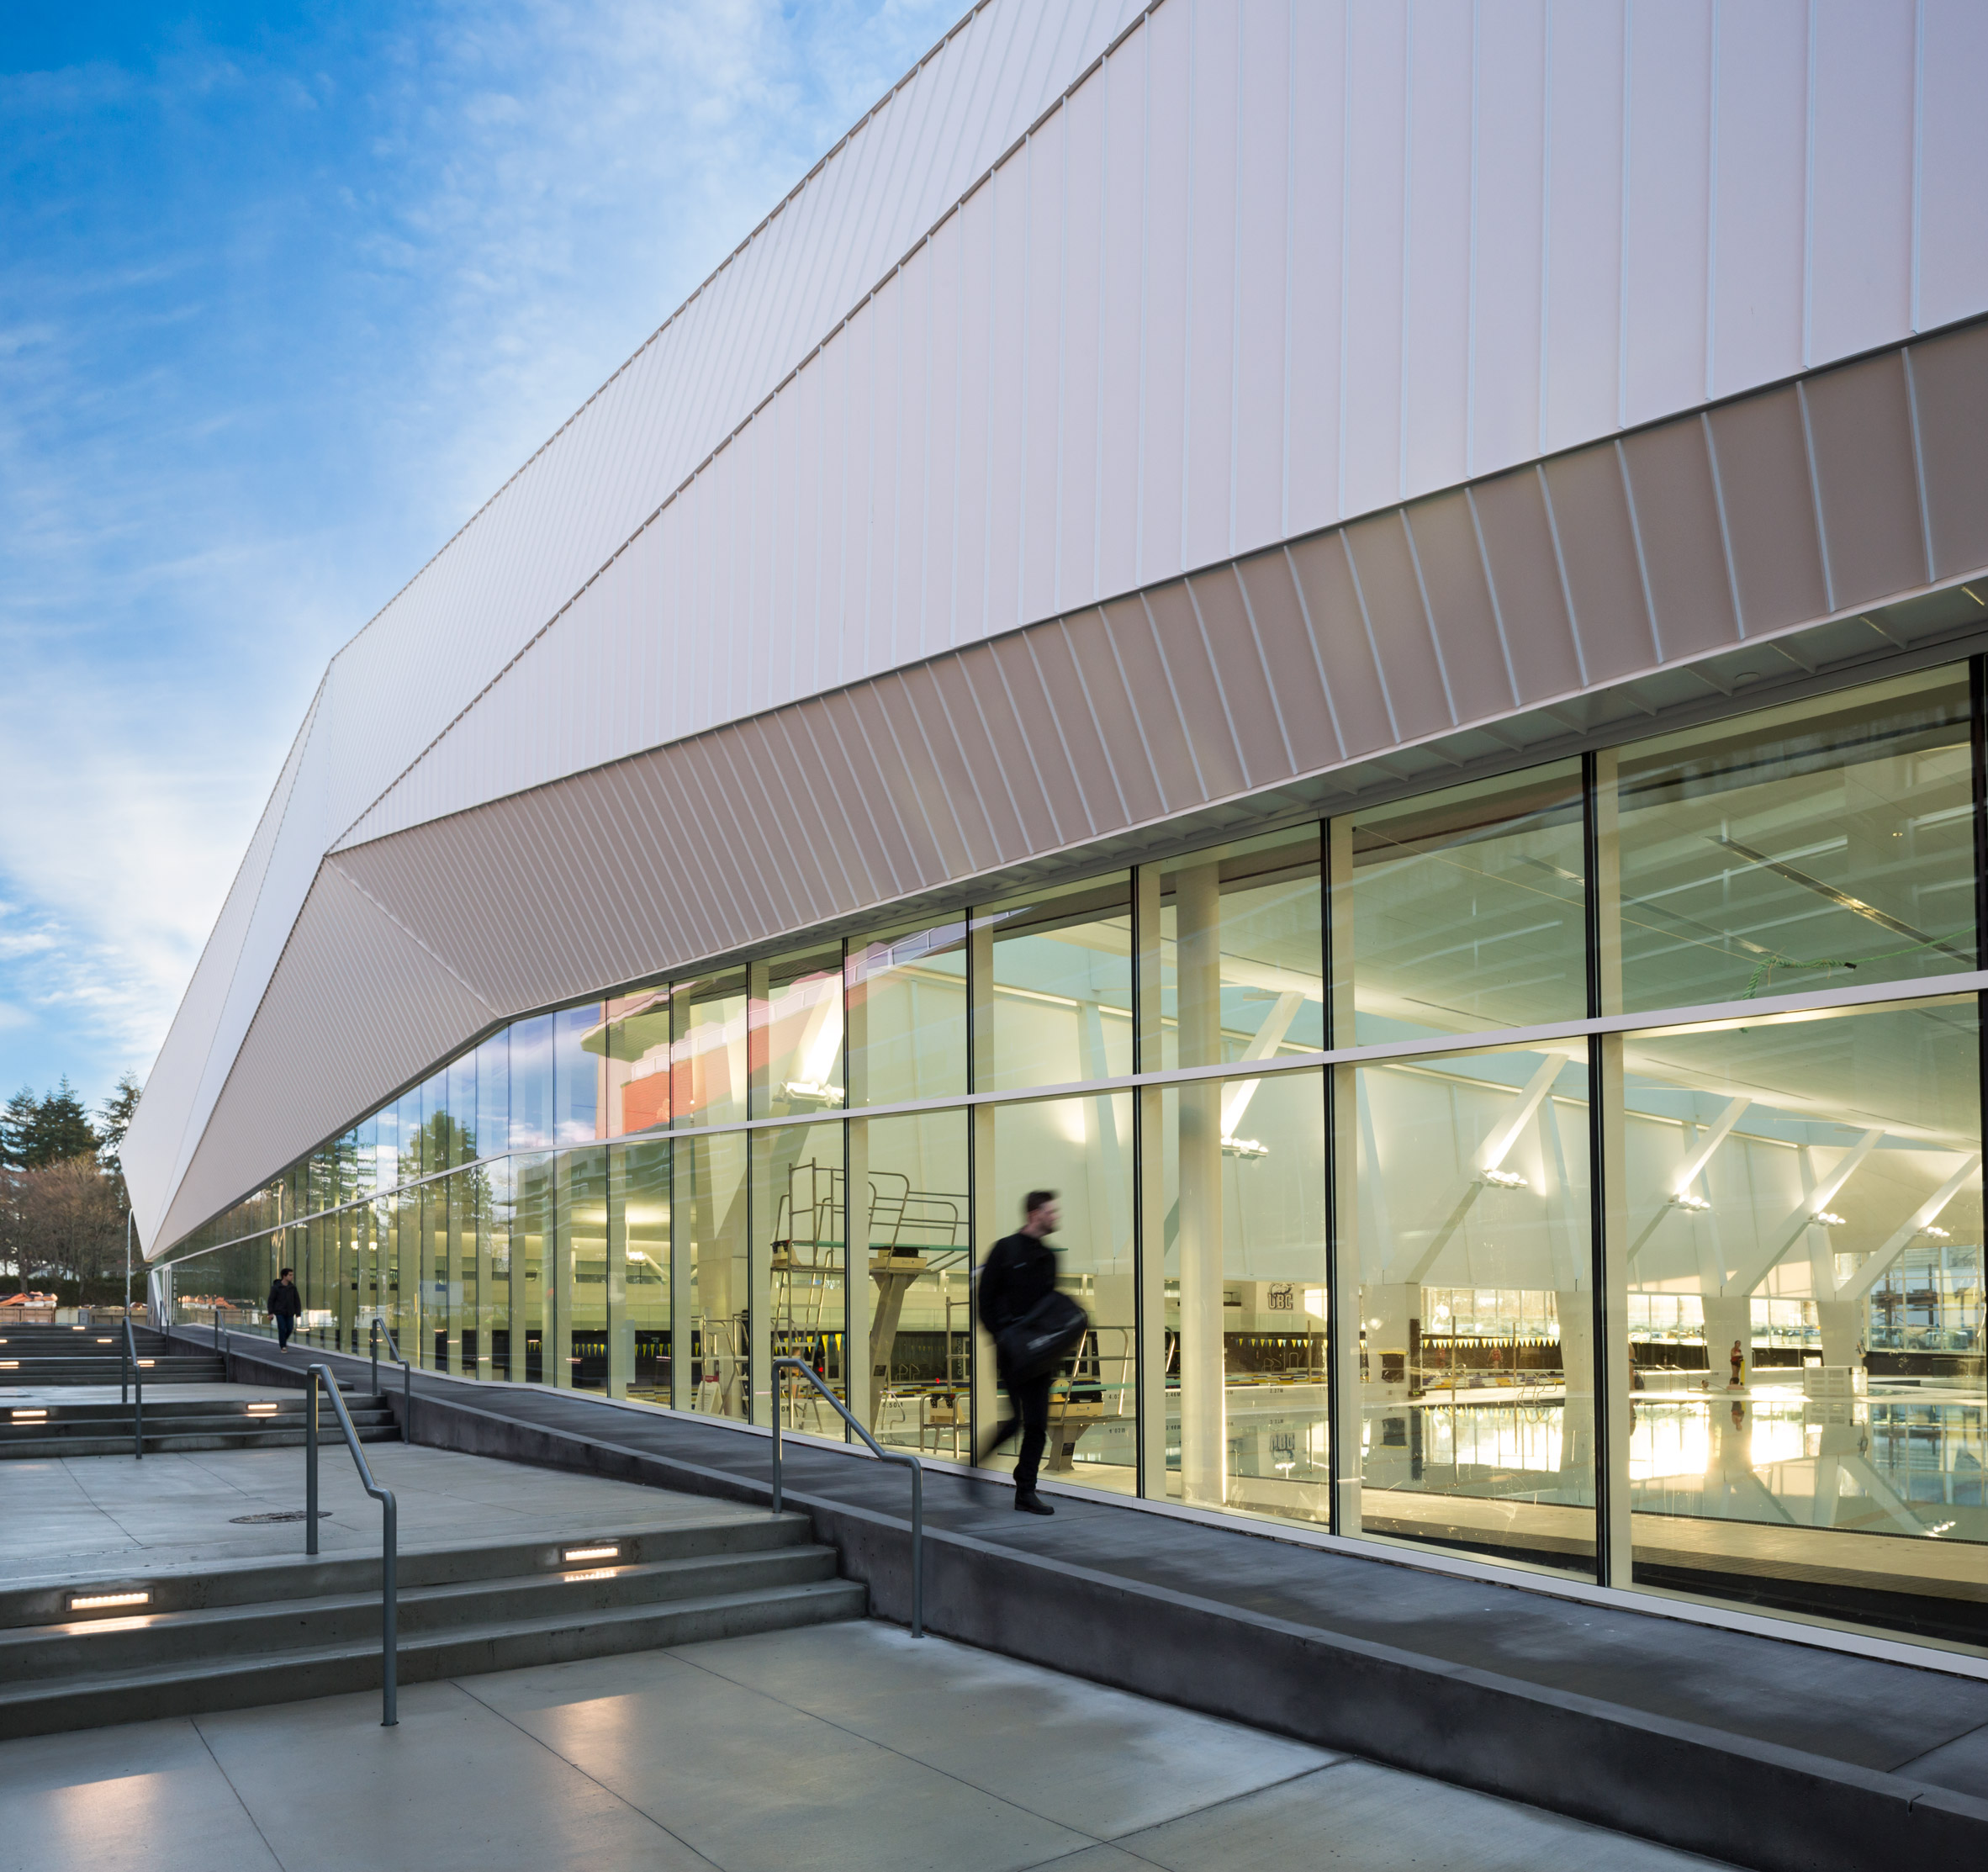 Angular white roof covers MJMA's glazed aquatic centre in Vancouver